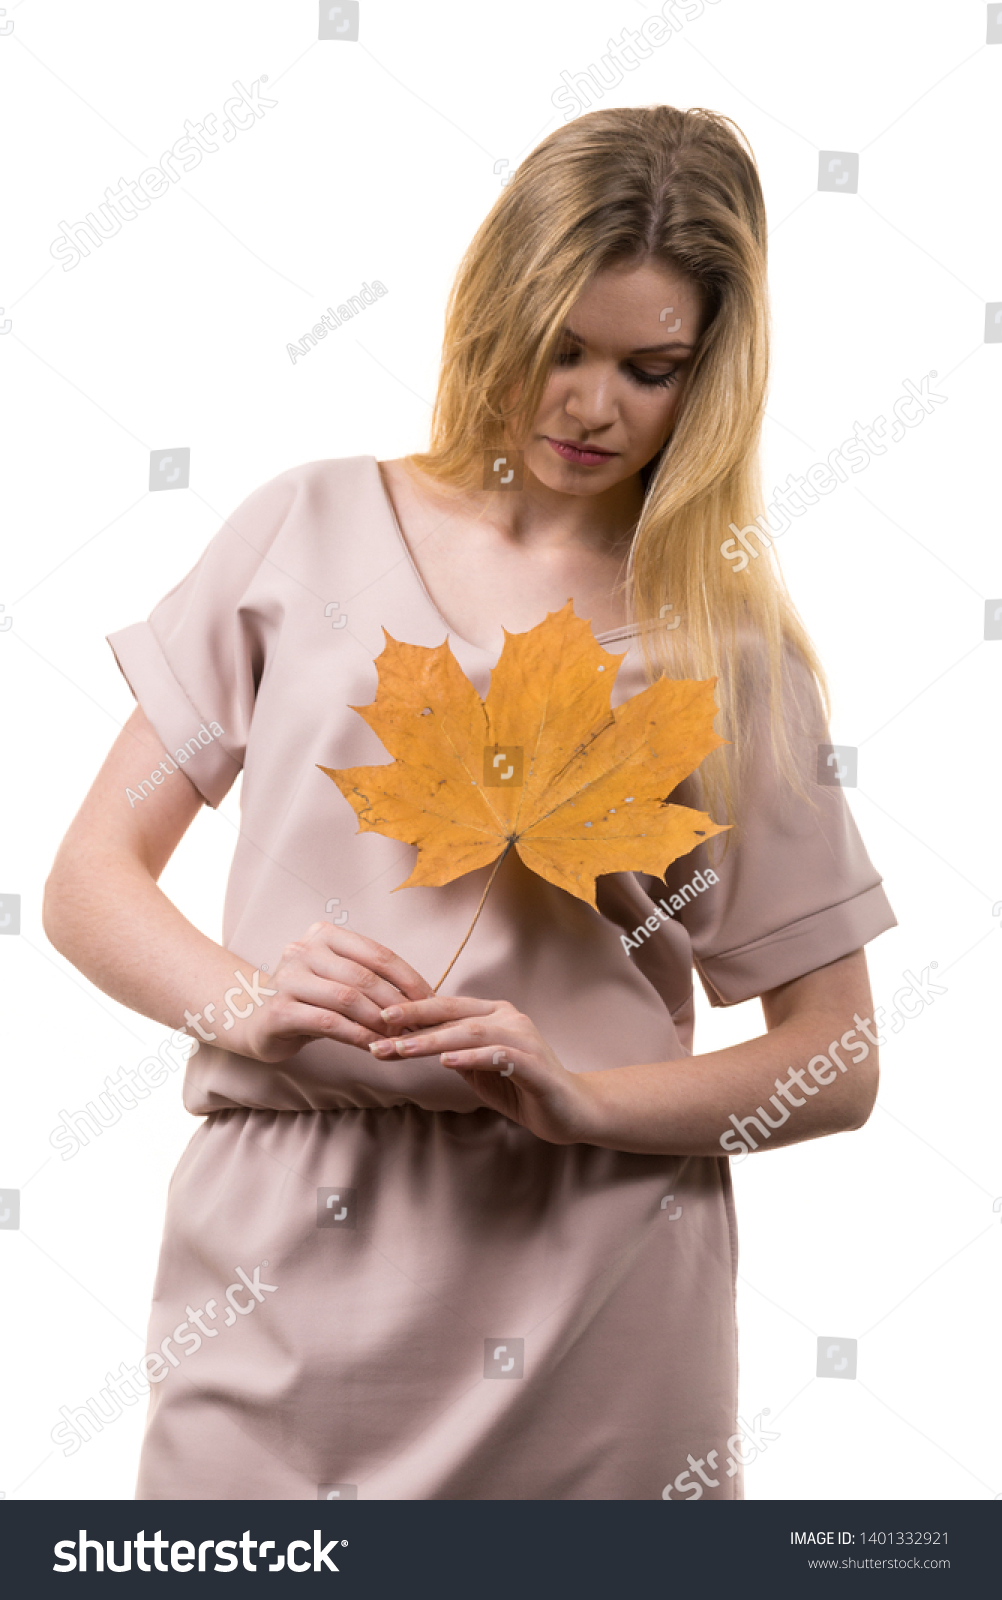 Fashionable Autumn Long Hair Blonde Girl Stock Image Download Now